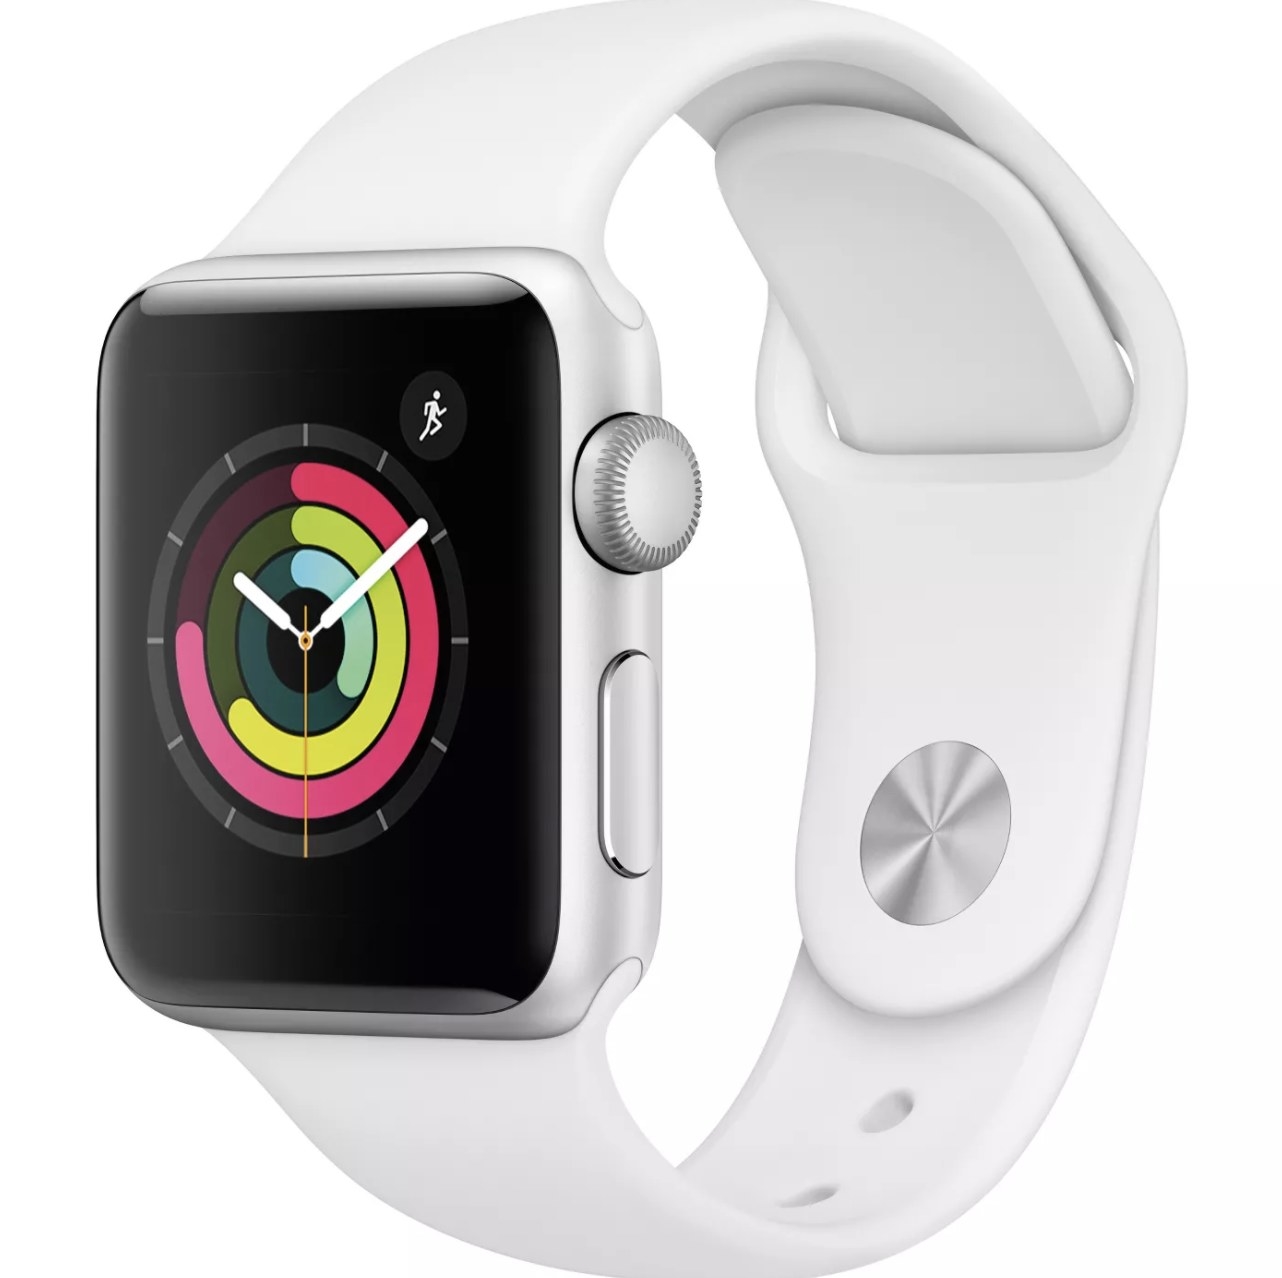 An Apple Watch with a white band and a screen showing the clock with exercise rings